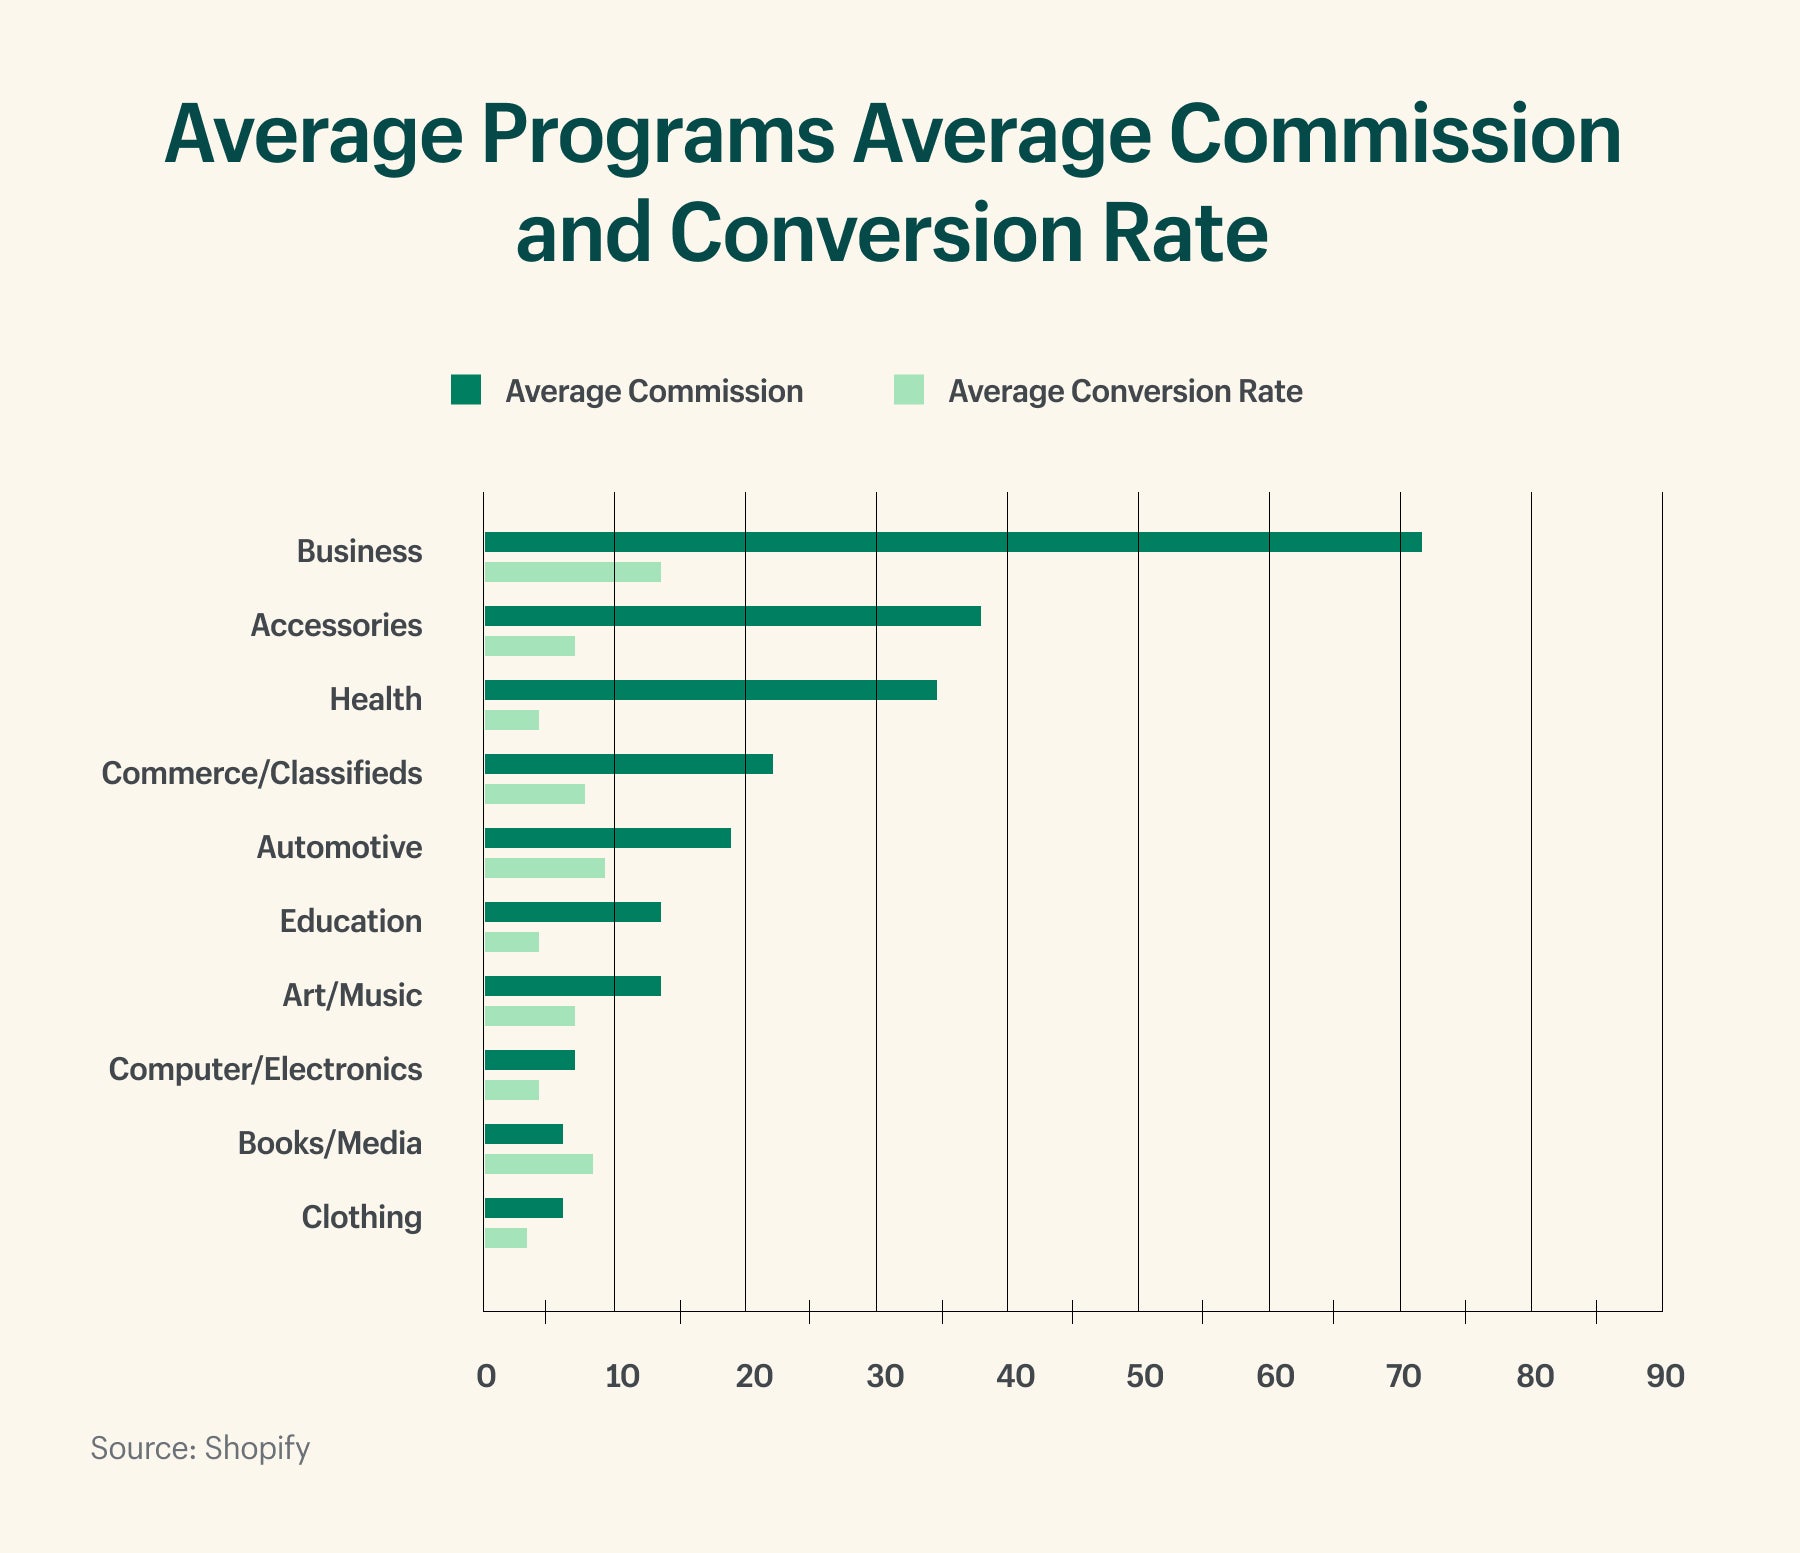 A bar graph of average program commission and conversion rate compared between industries